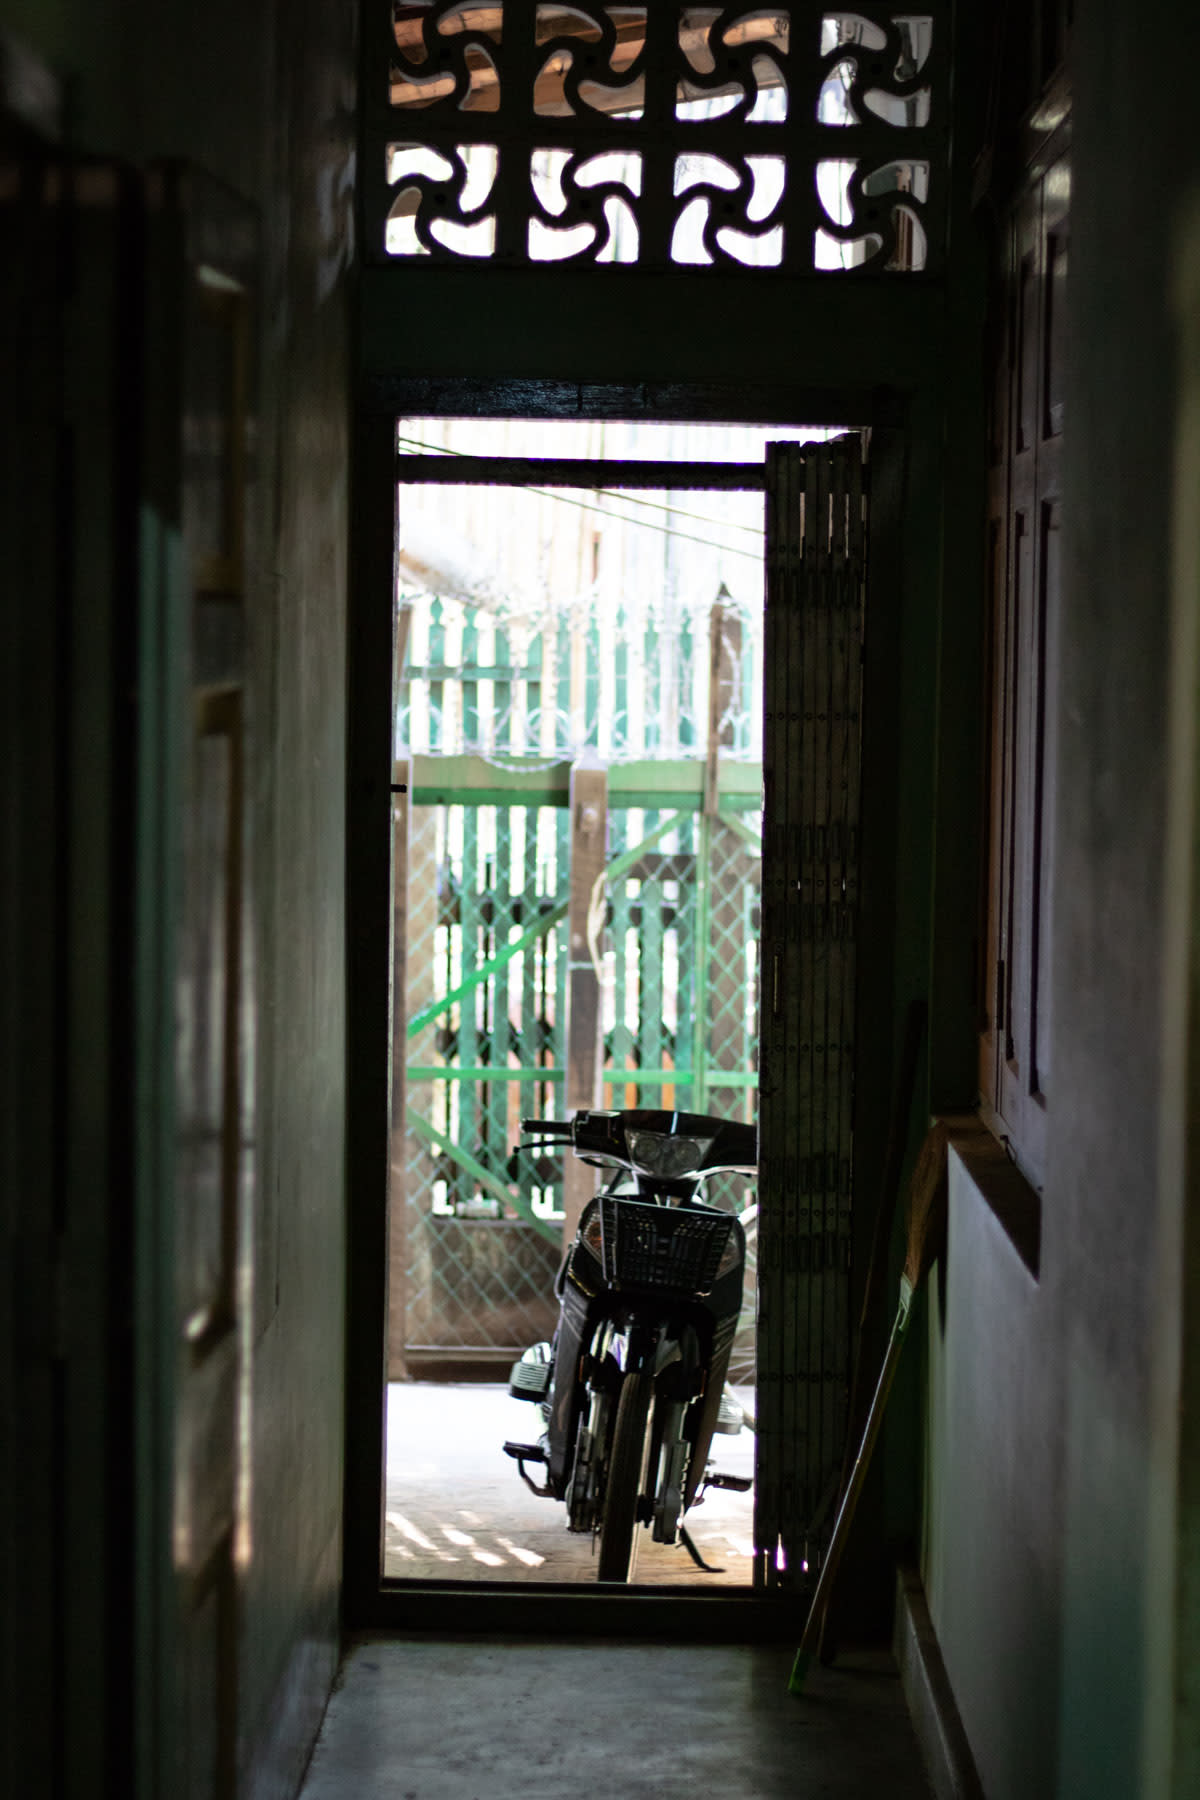 A motorbike leaning on a doorway